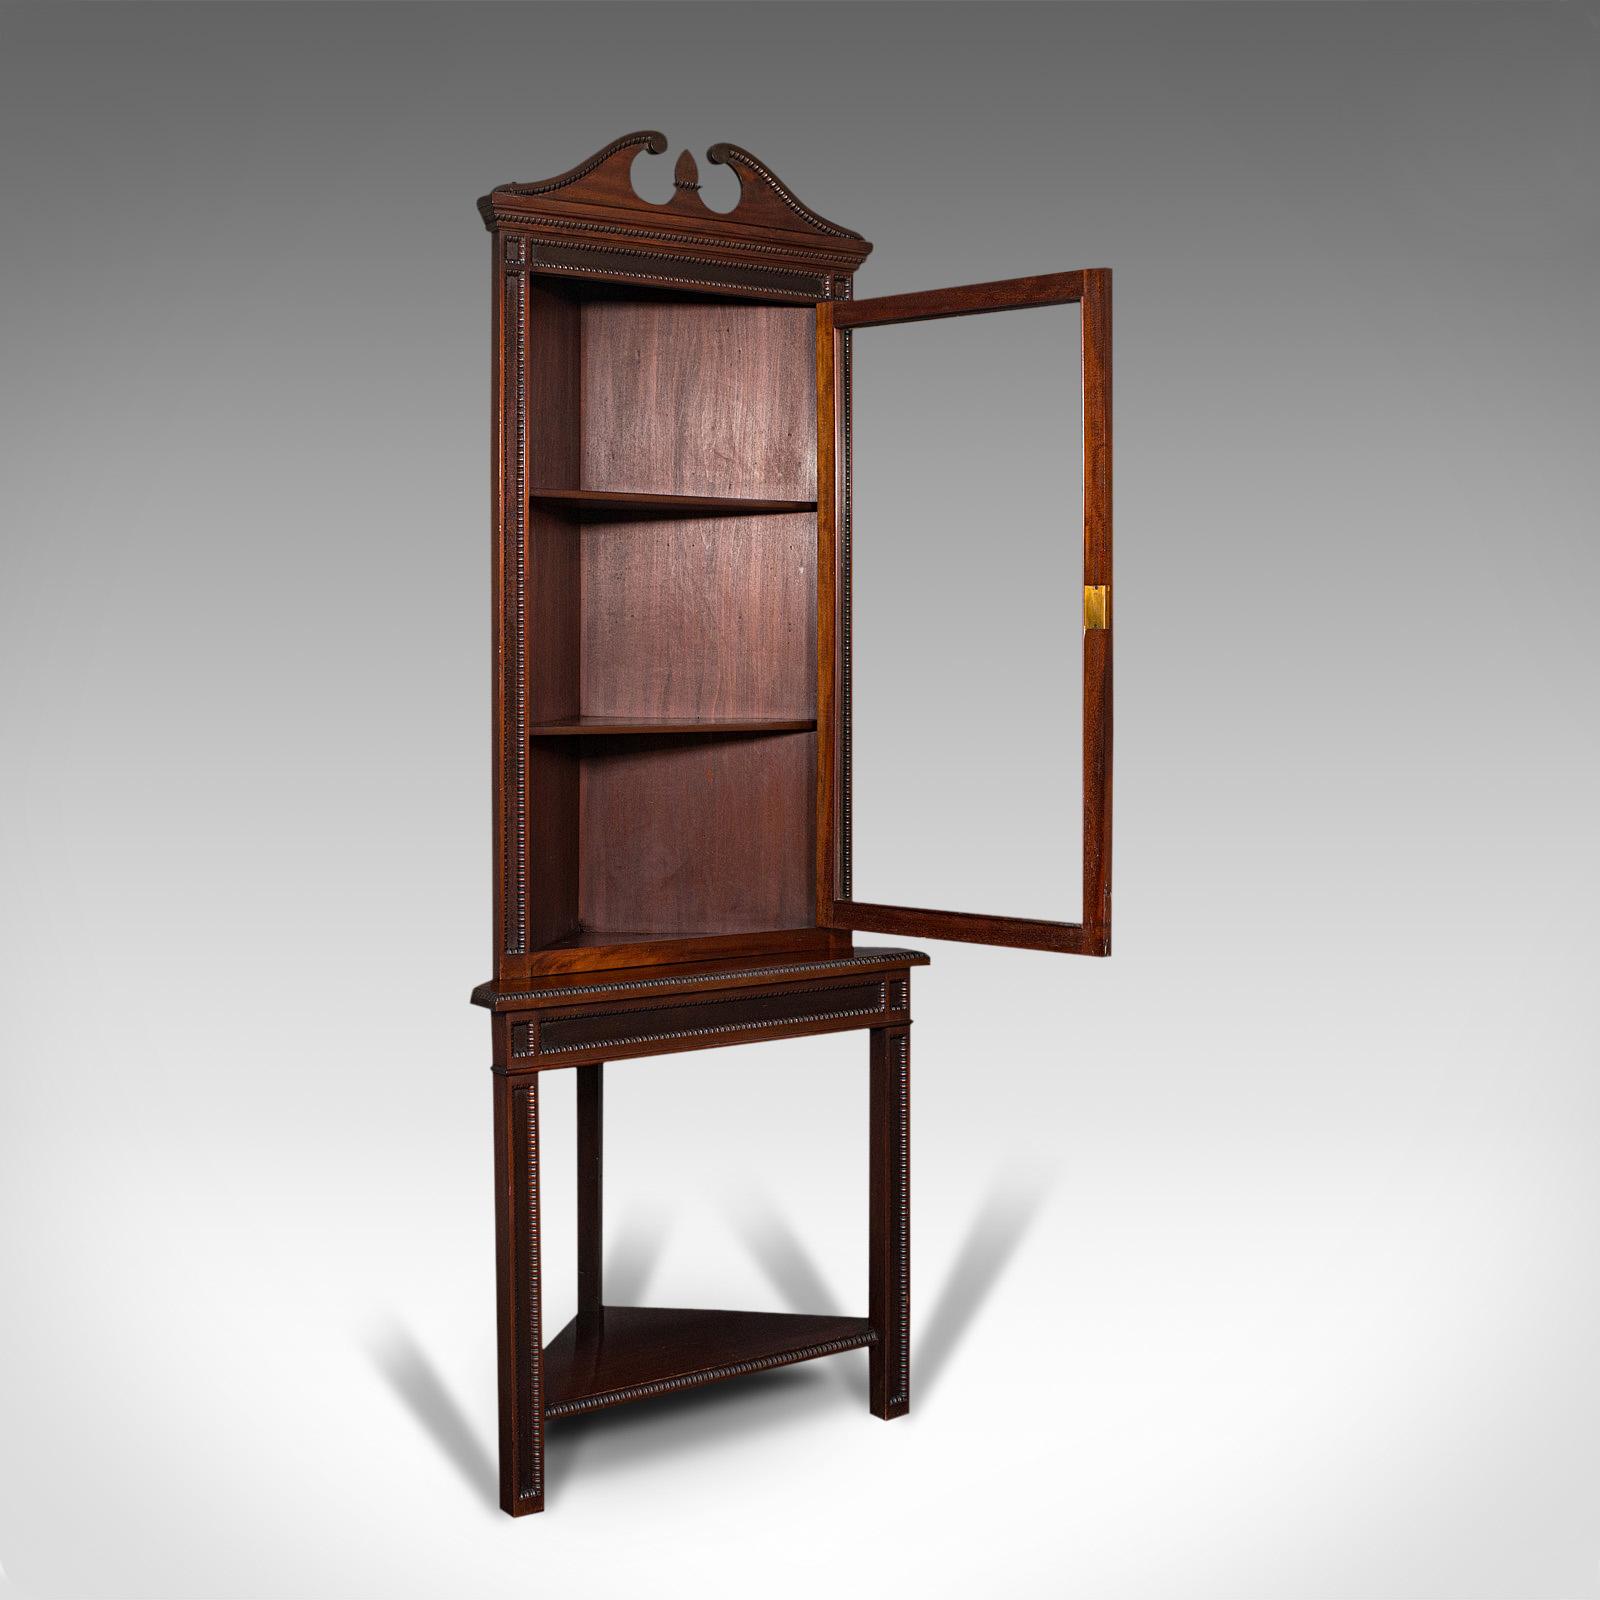 This is a tall antique corner cabinet on stand. An English, mahogany display cupboard, dating to the Edwardian period, circa 1910.

Of generous proportion, standing at 6' 52